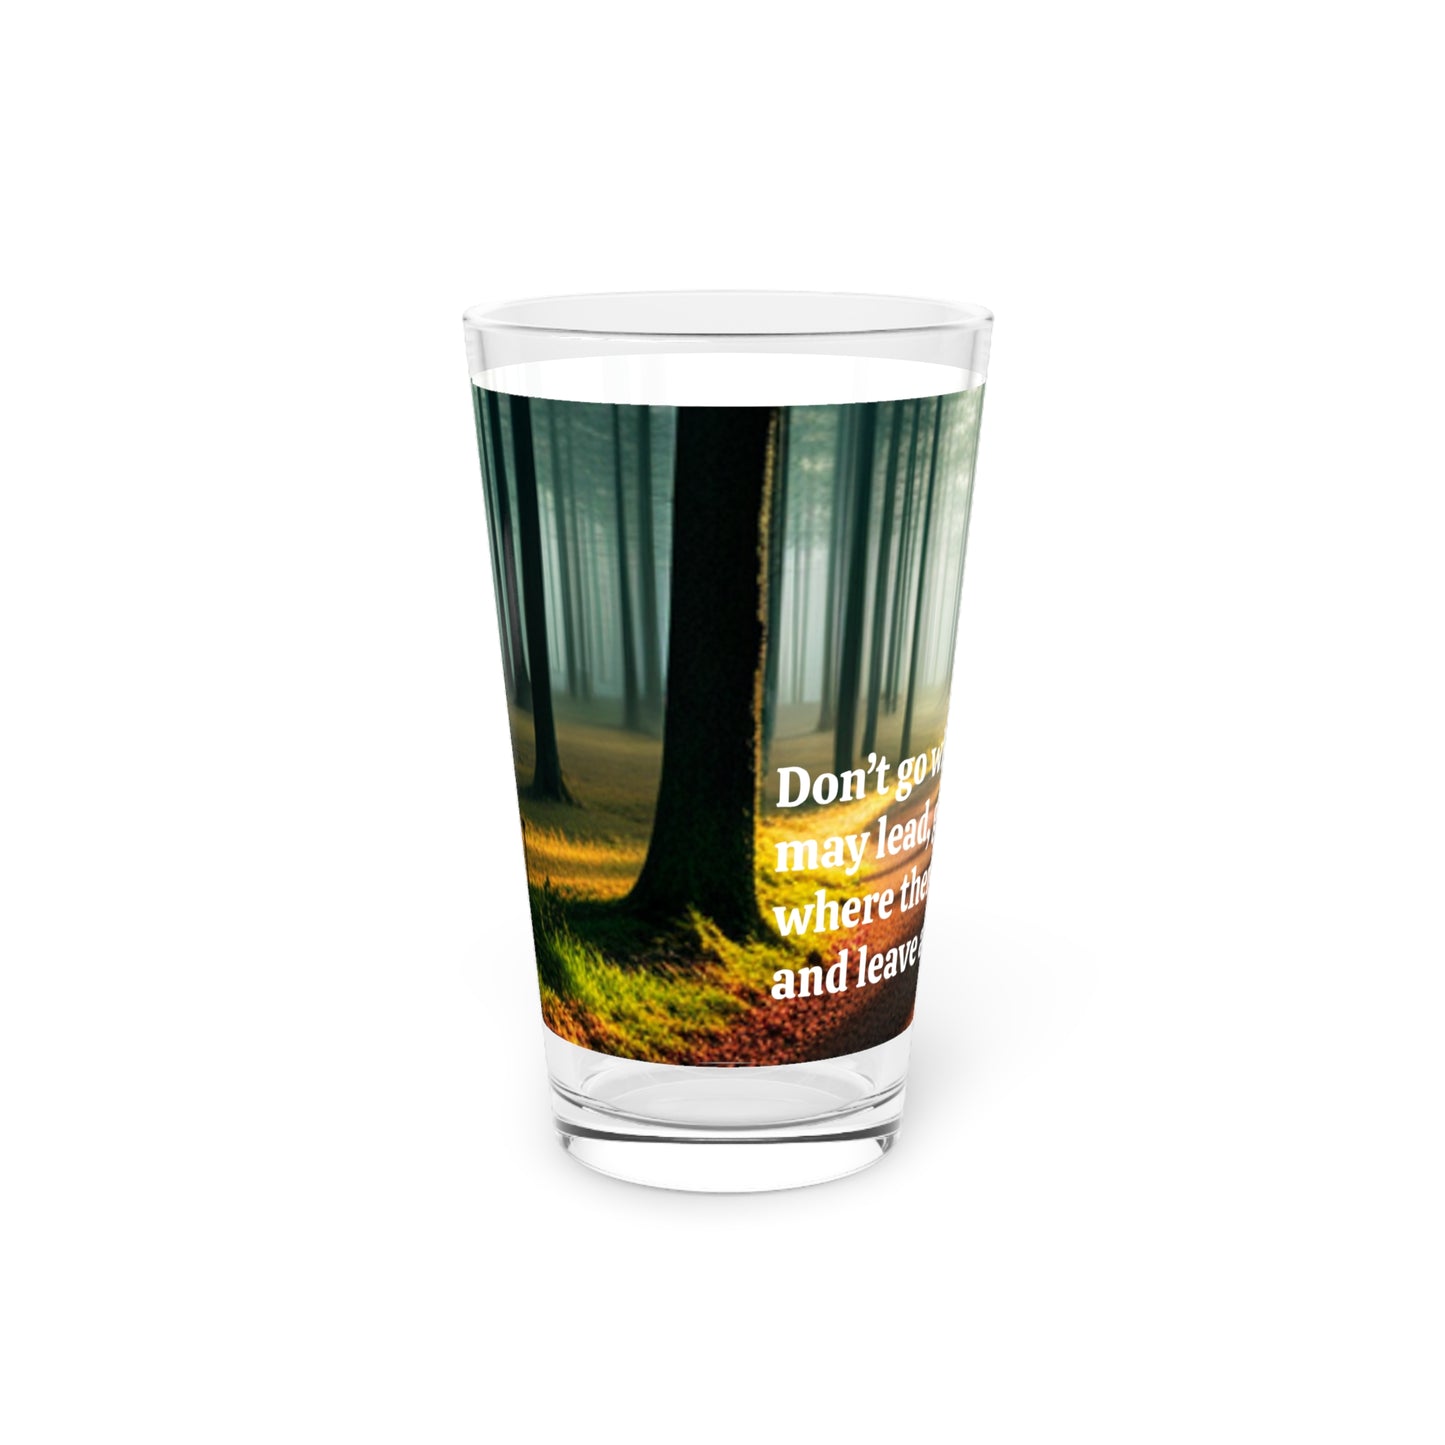 Go Where There Is No Path - Pint Glass, 16oz